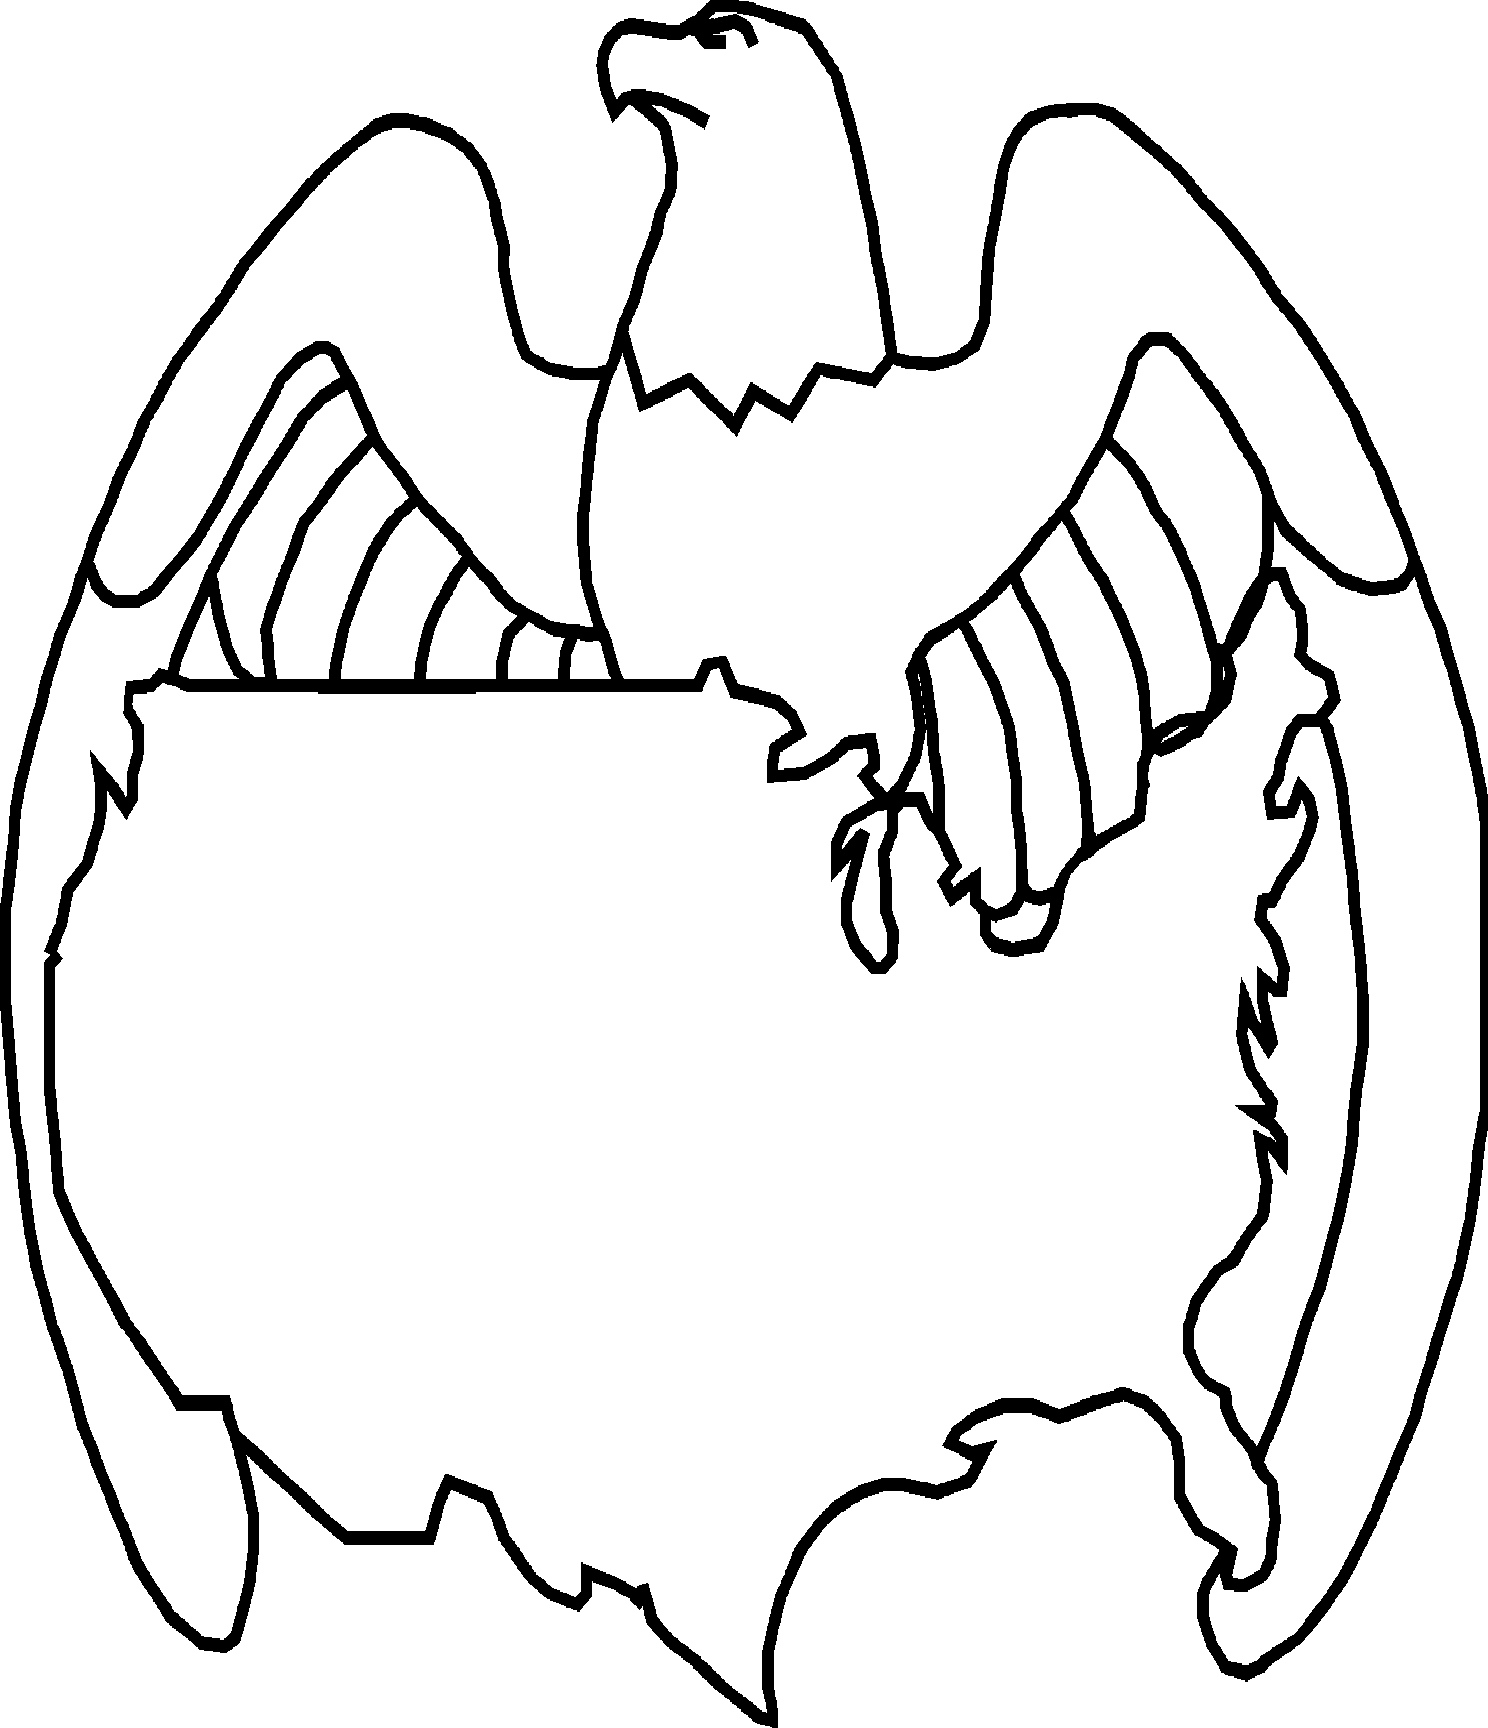 American Eagle Clip Art Black And White Images  Pictures - Becuo